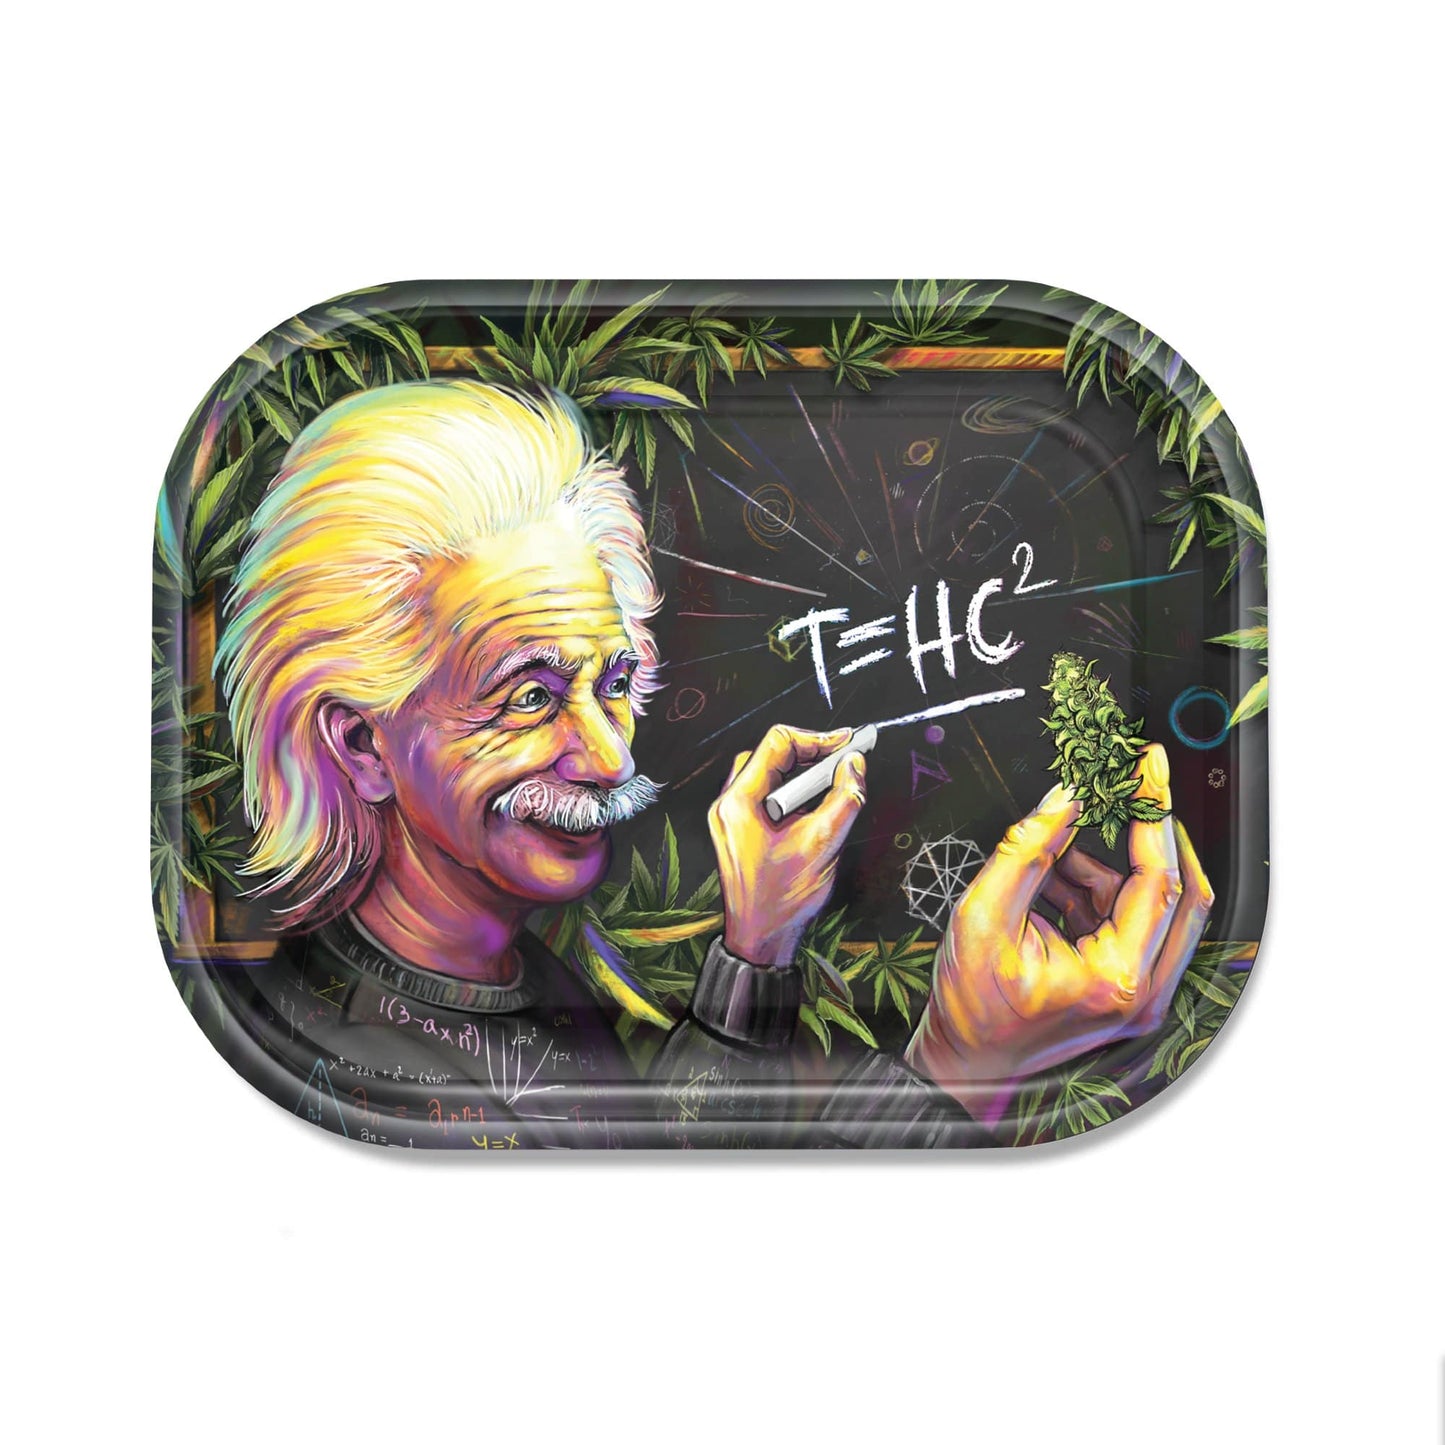 V-Syndicate Glass Small / T=HC2 Higher Education V-Syndicate Metal Rolling Trays